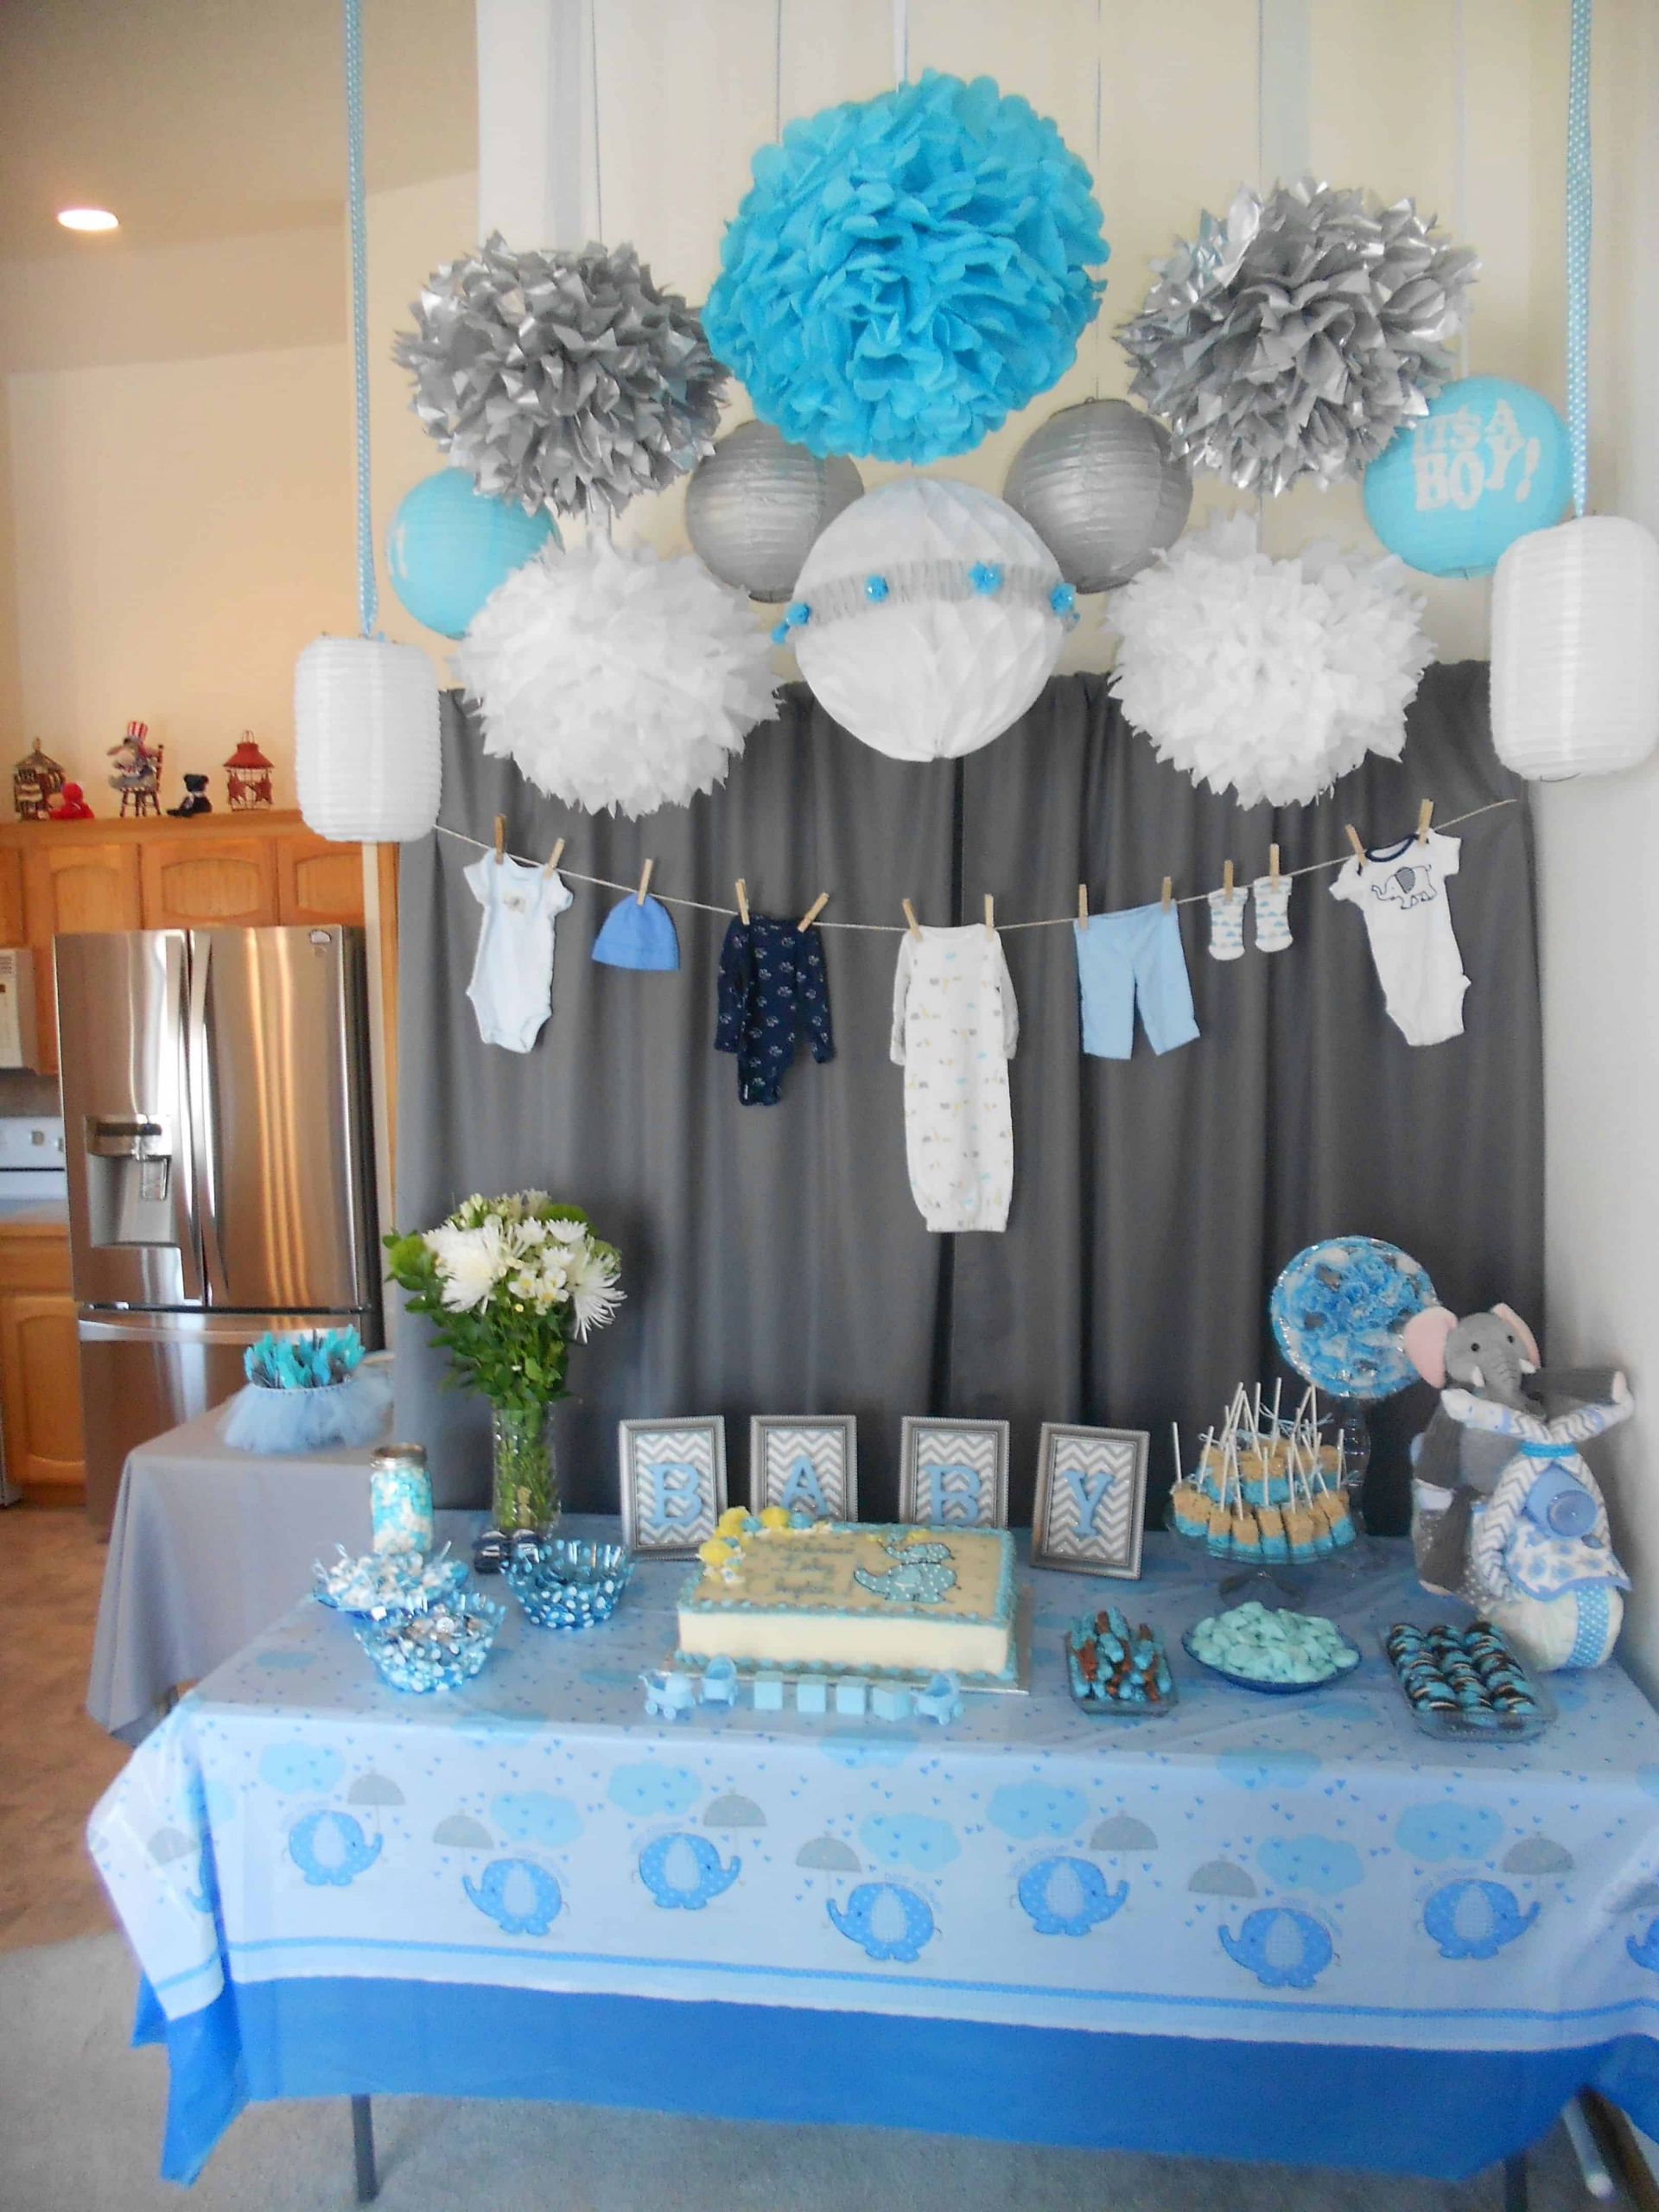 Boy Baby Shower Decorating Ideas
 17 Unique Baby Shower Ideas For Boys